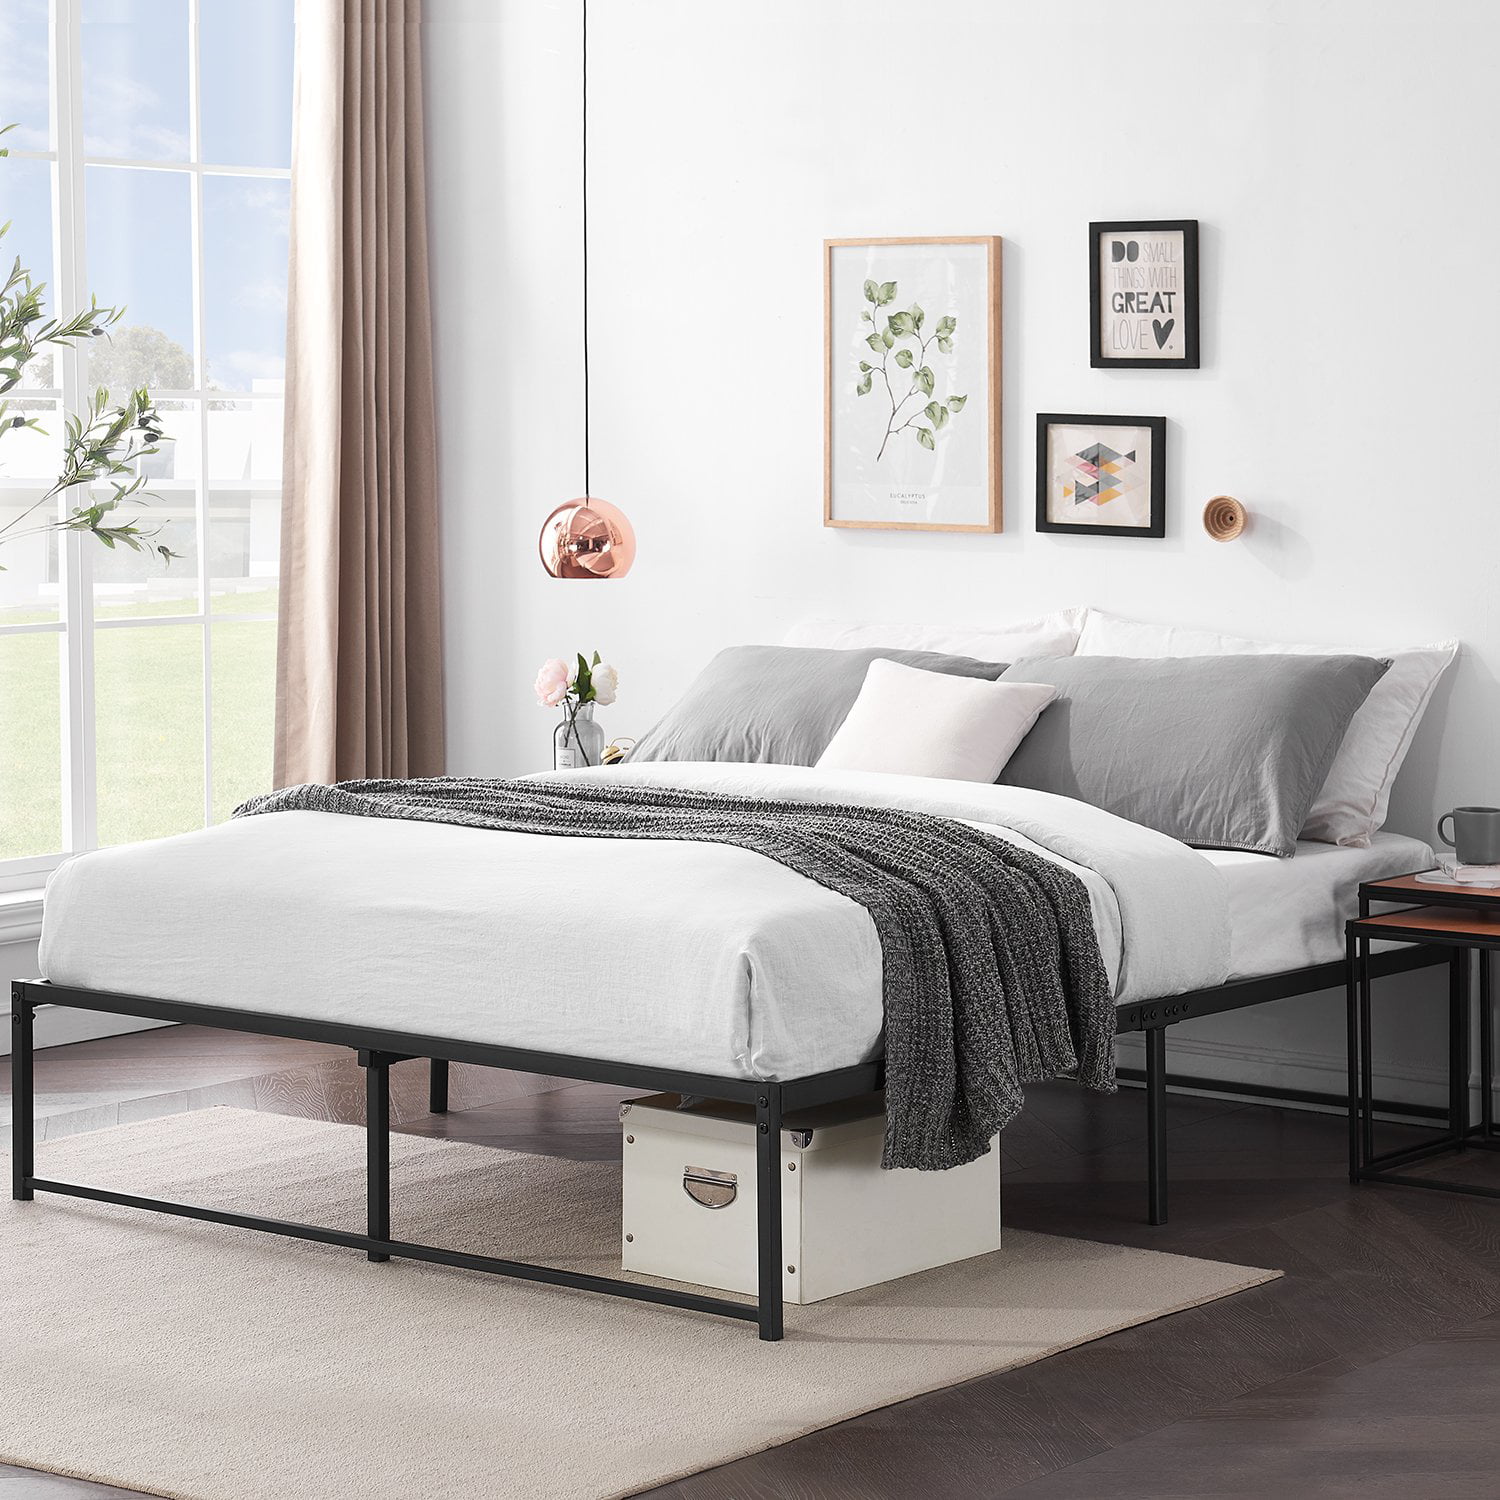 Metal Platform Bed Frame Full Size With, King Bed No Headboard